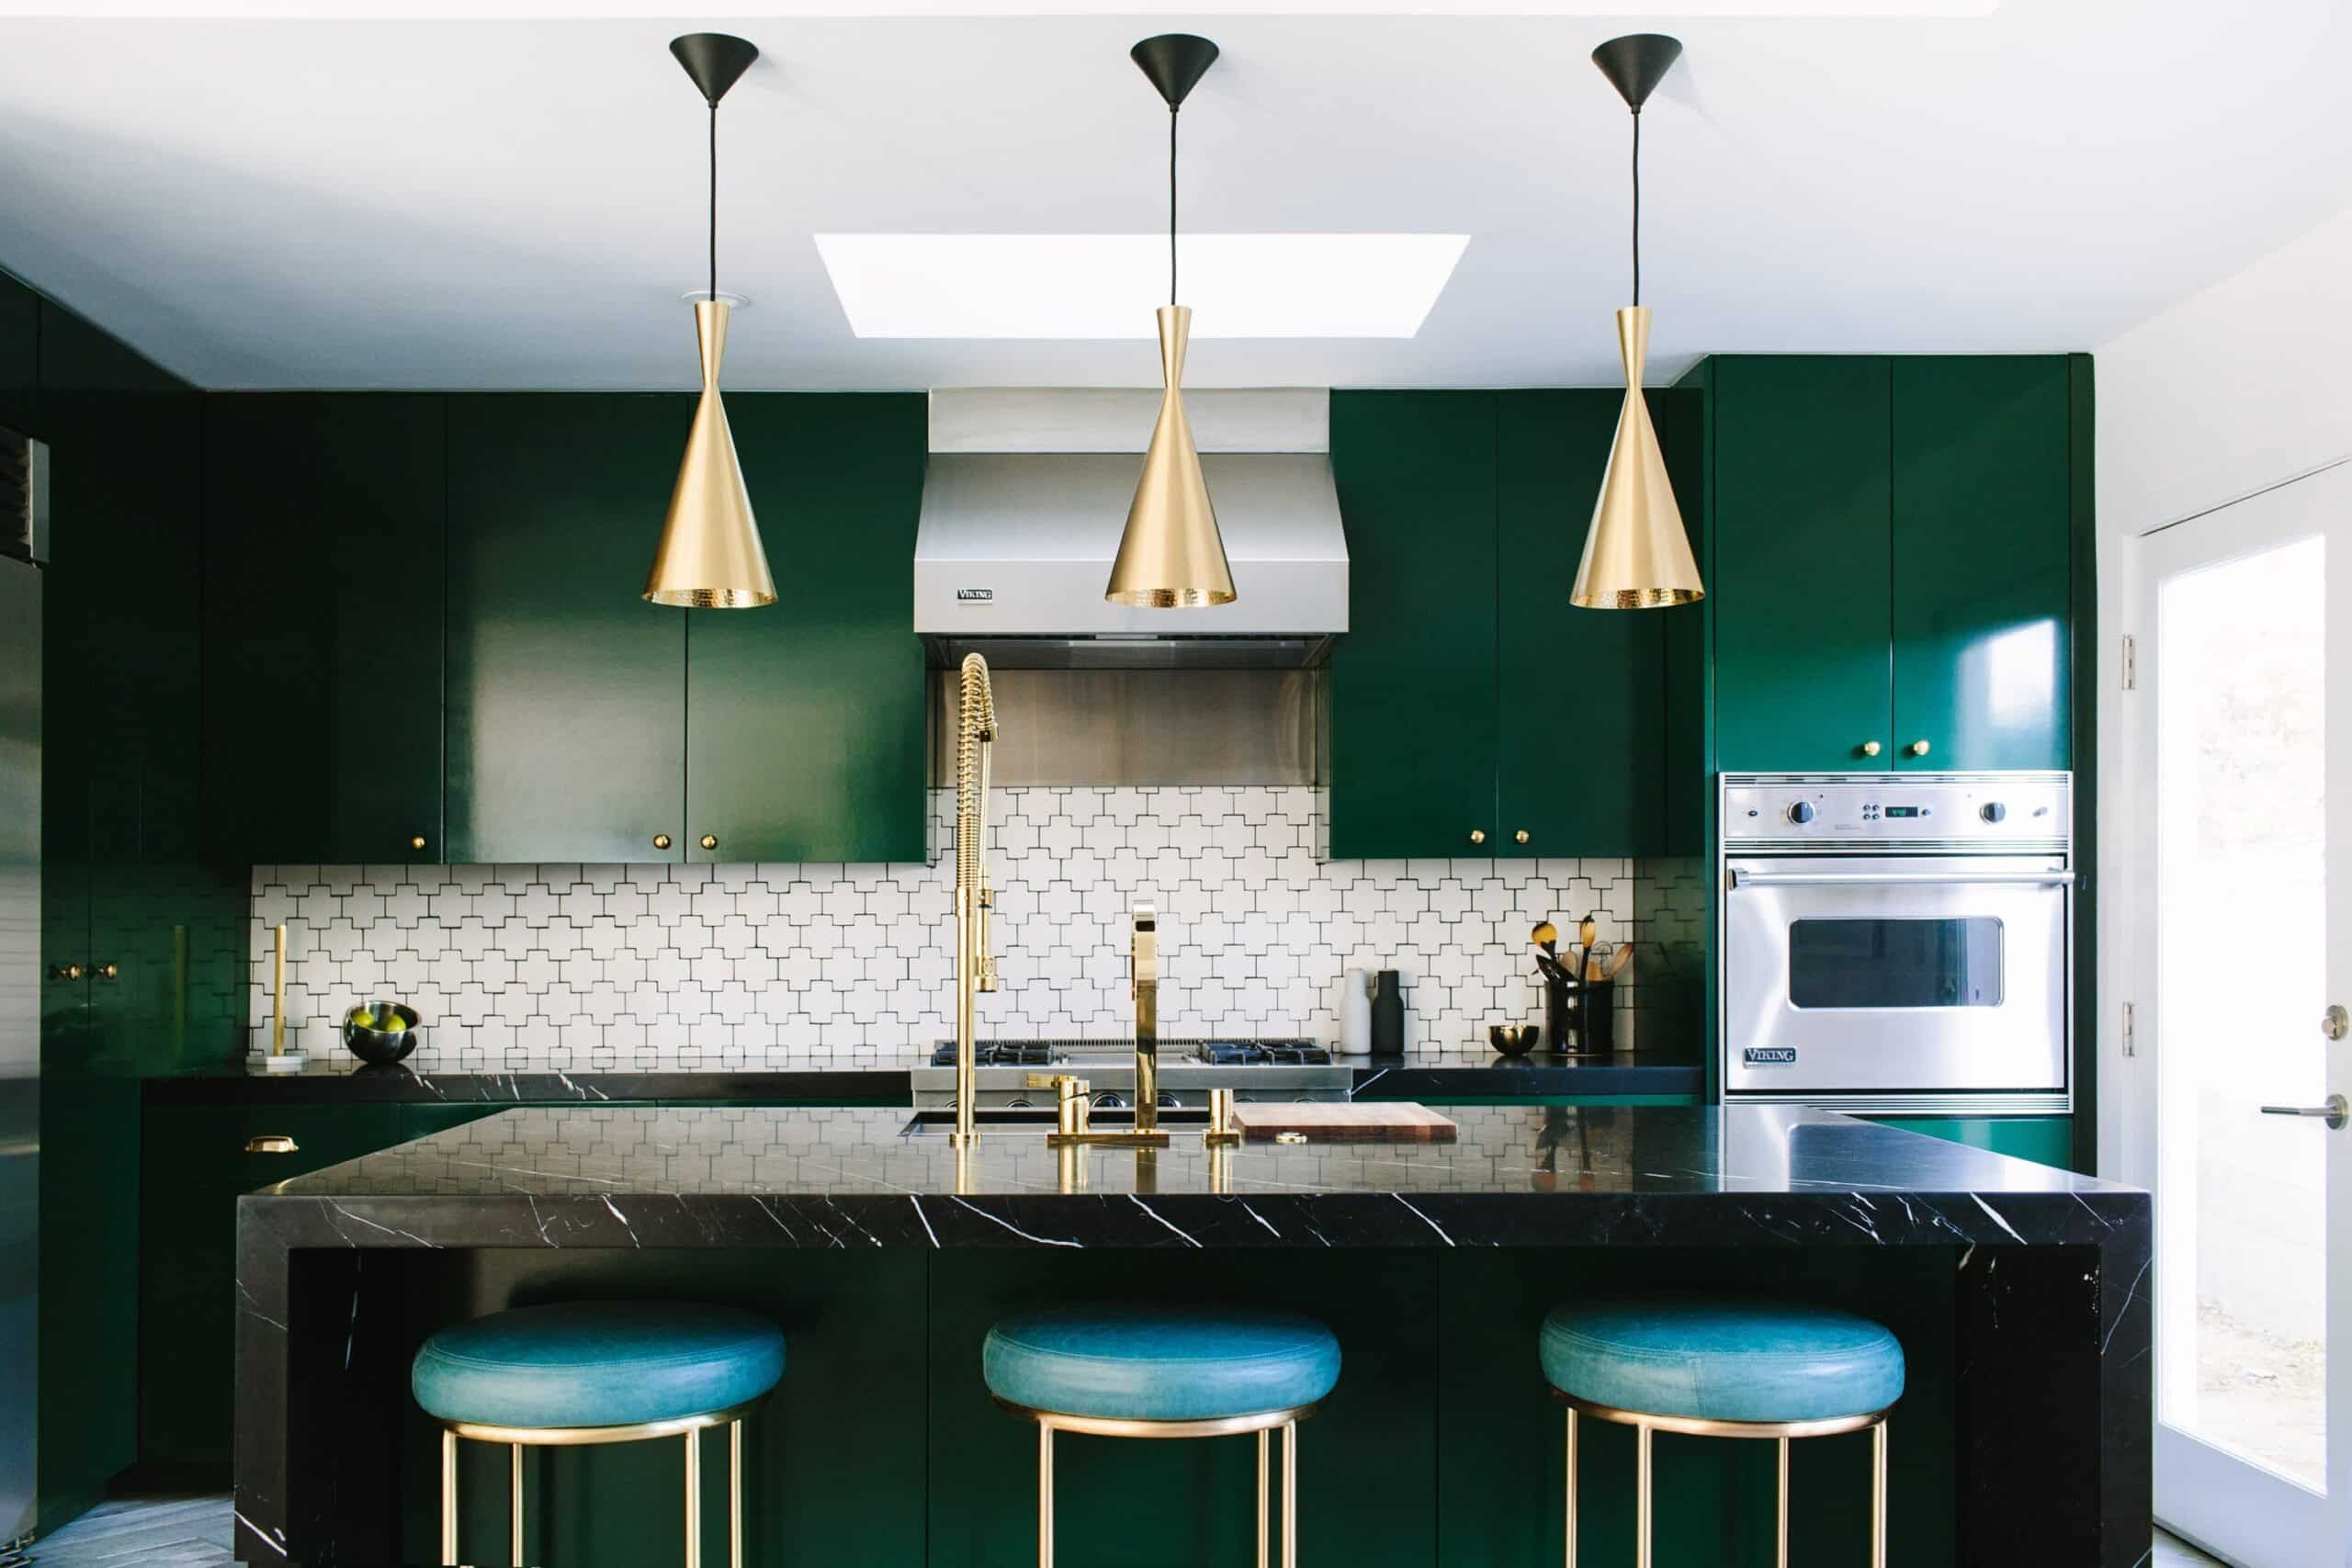 8 Spaces with Glamorous Touches of Brass